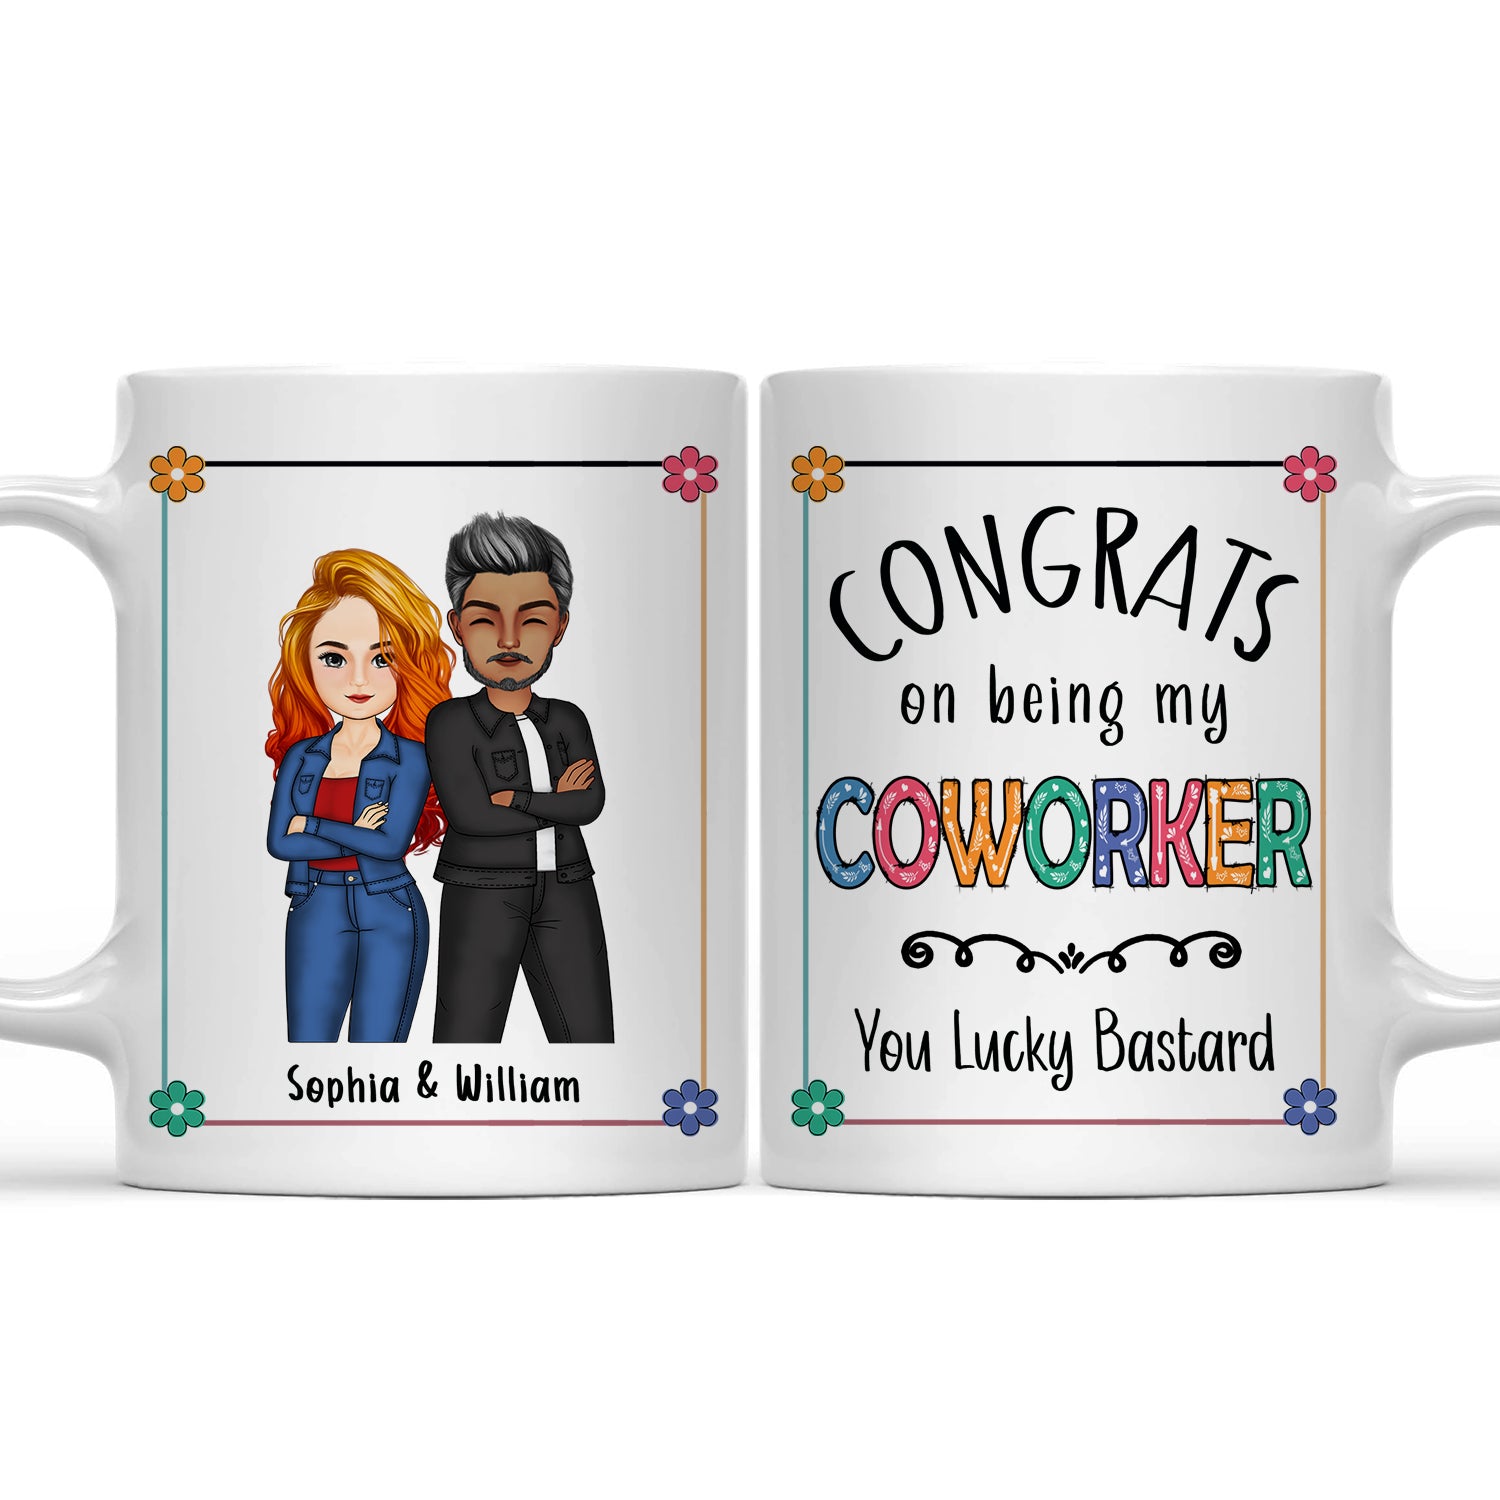 Congrats On Being My Coworker - Gift For Colleagues - Personalized Mug